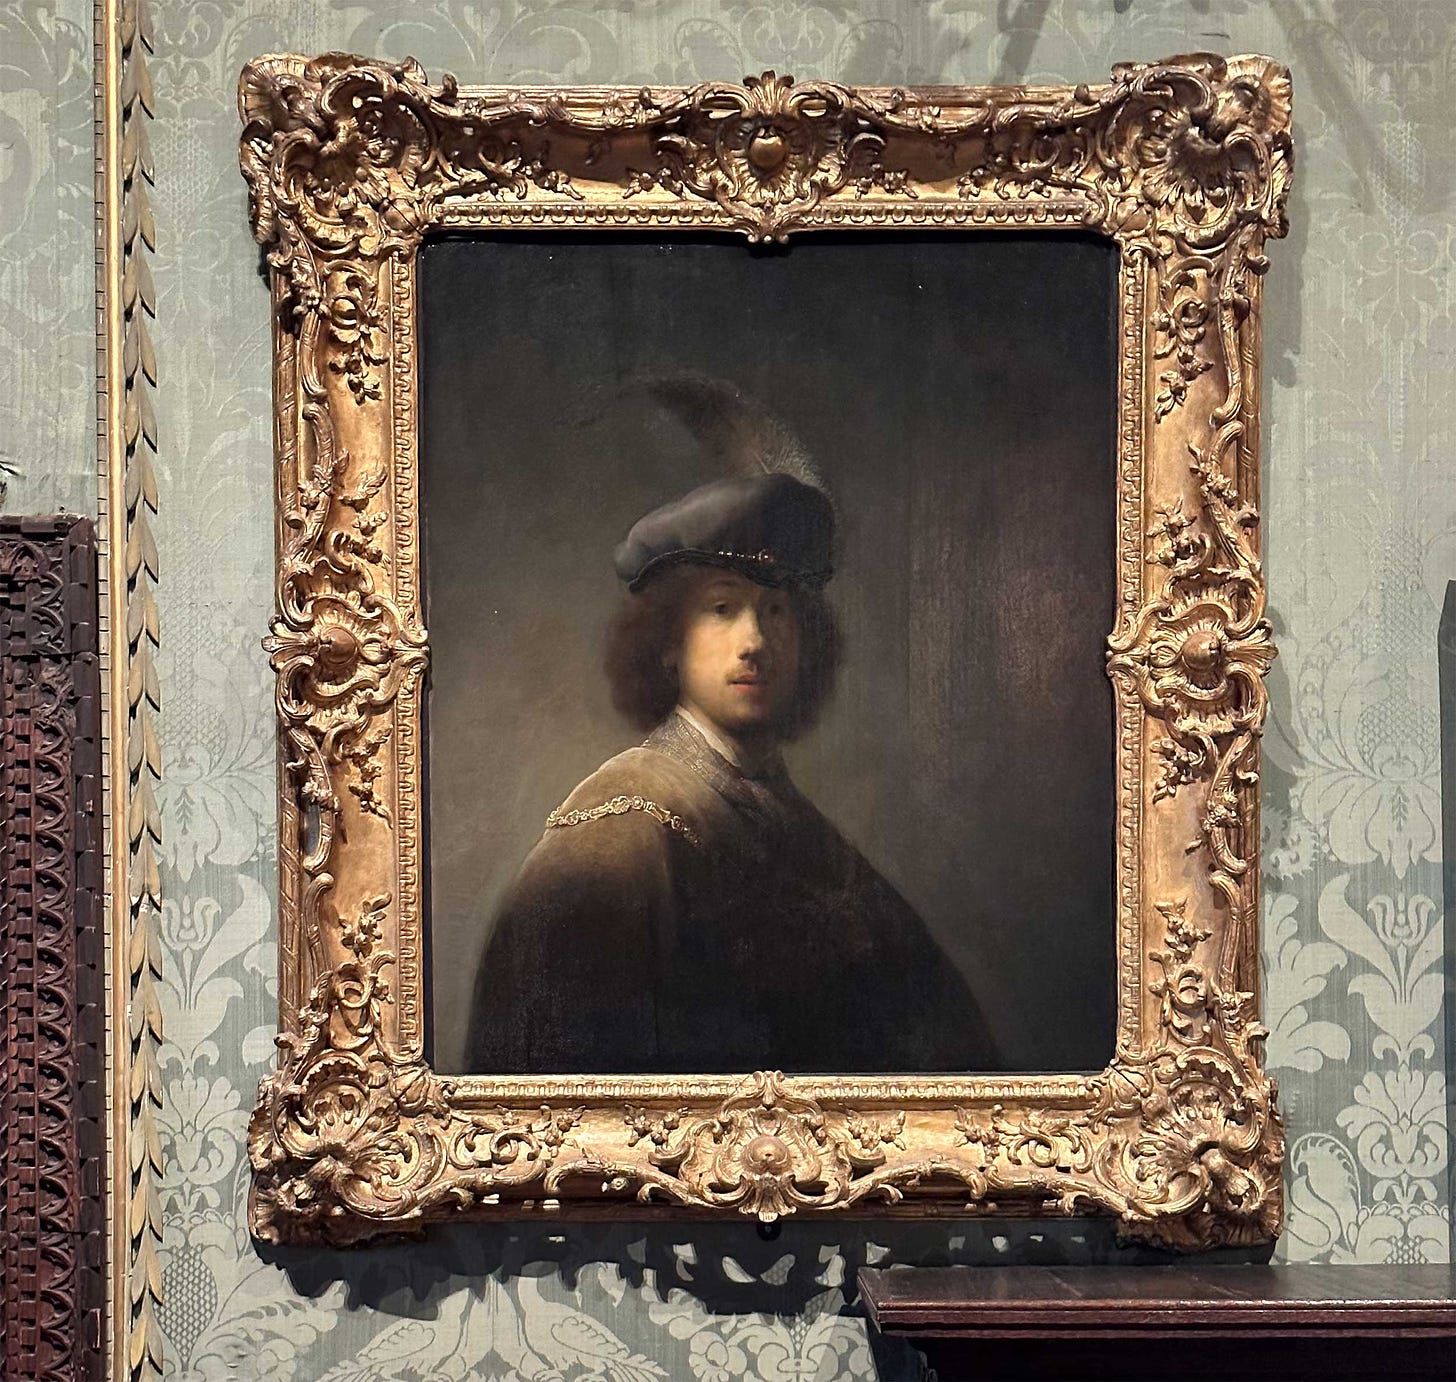 Self portrait of a young Rembrandt against a dark background, wearing a hat with a feather.